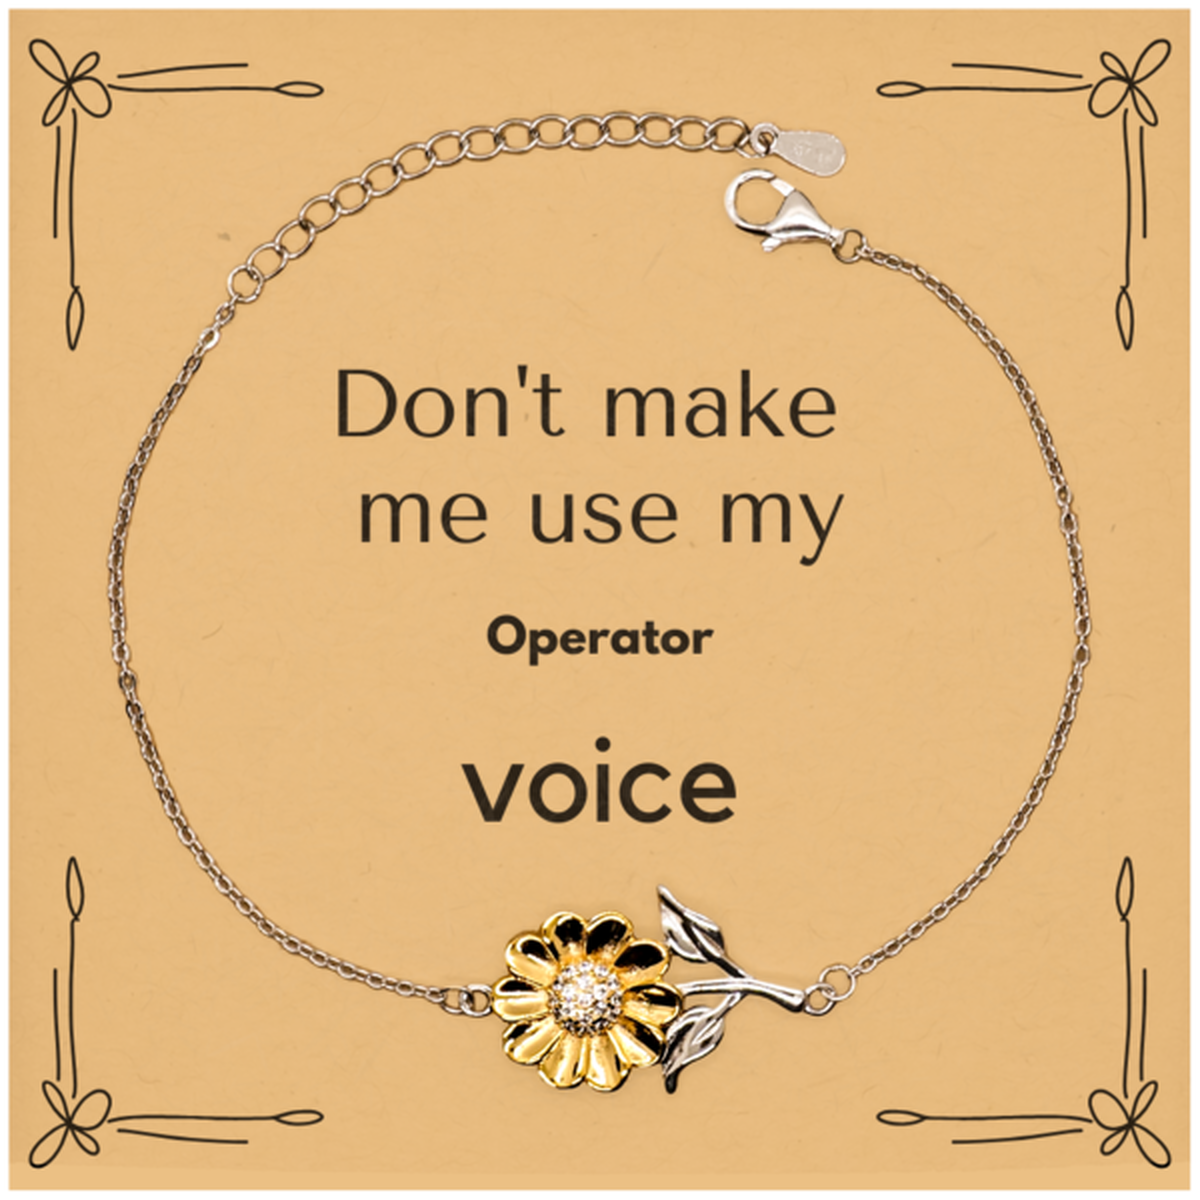 Don't make me use my Operator voice, Sarcasm Operator Card Gifts, Christmas Operator Sunflower Bracelet Birthday Unique Gifts For Operator Coworkers, Men, Women, Colleague, Friends